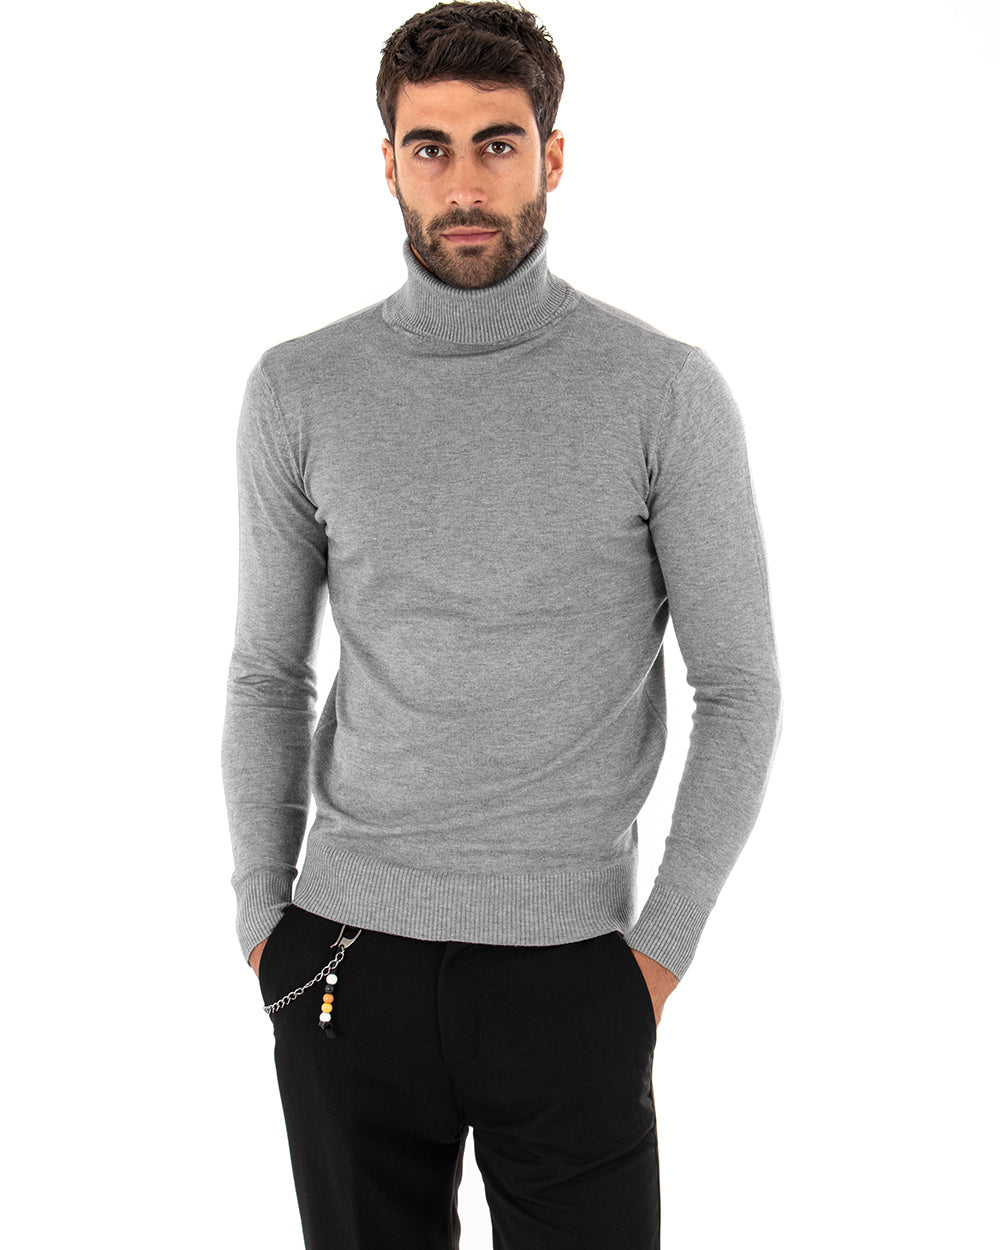 Men's Long Sleeves Elastic Turtleneck Sweater Solid Color Light Gray GIOSAL M2539A